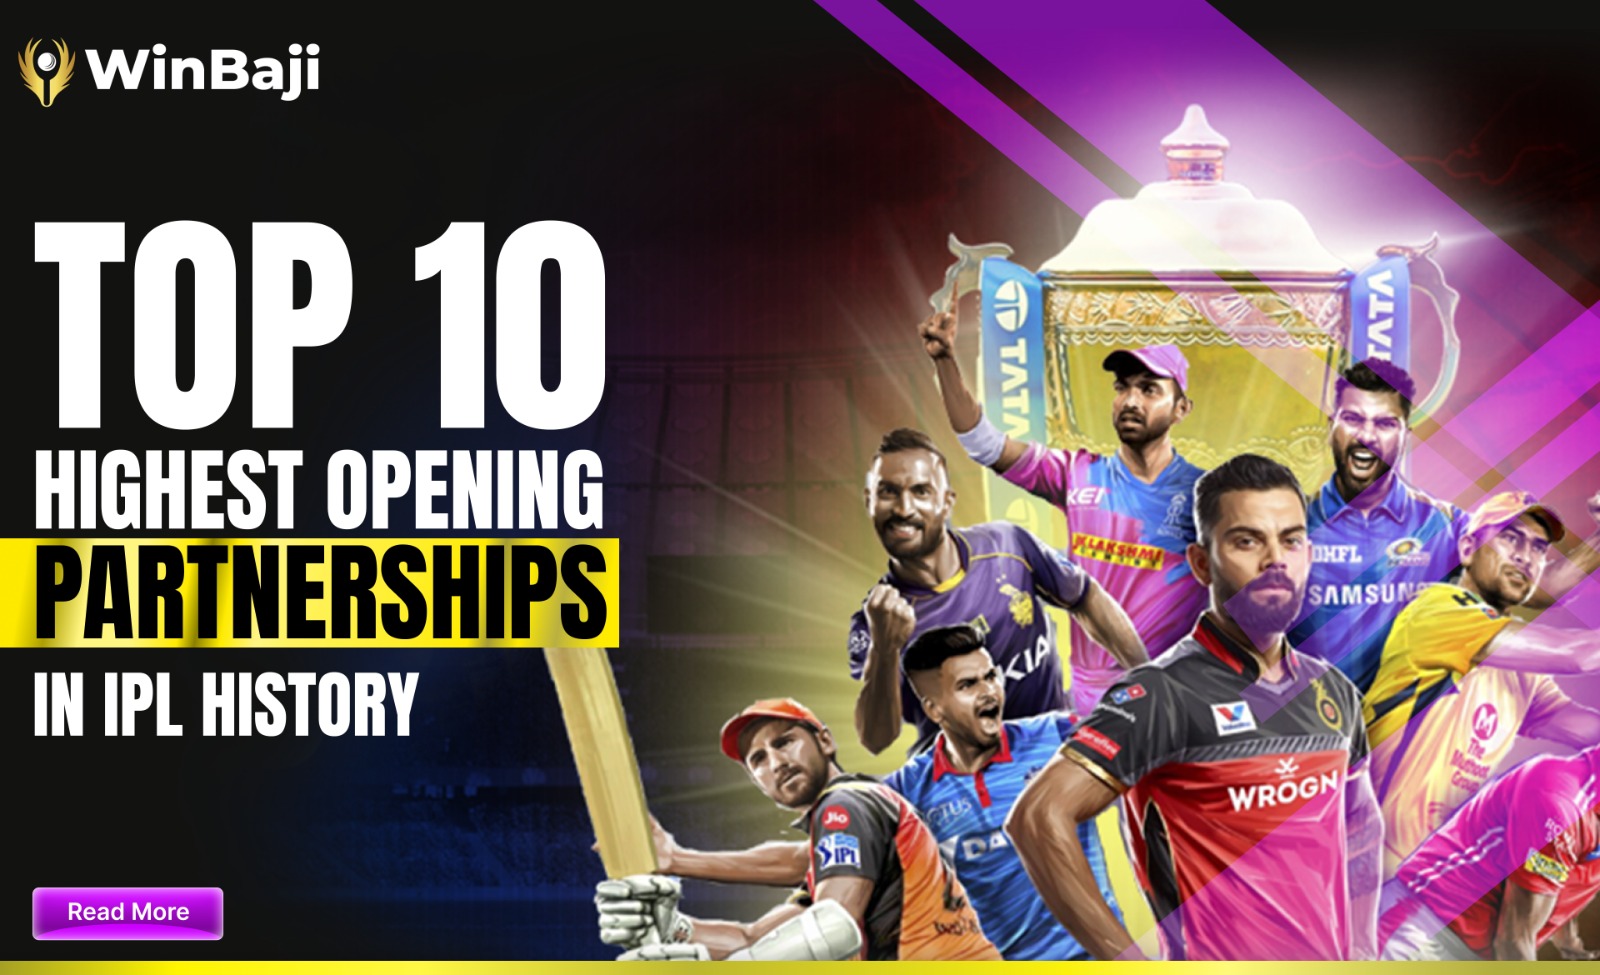 Top 10 Highest Opening Partnerships in IPL History